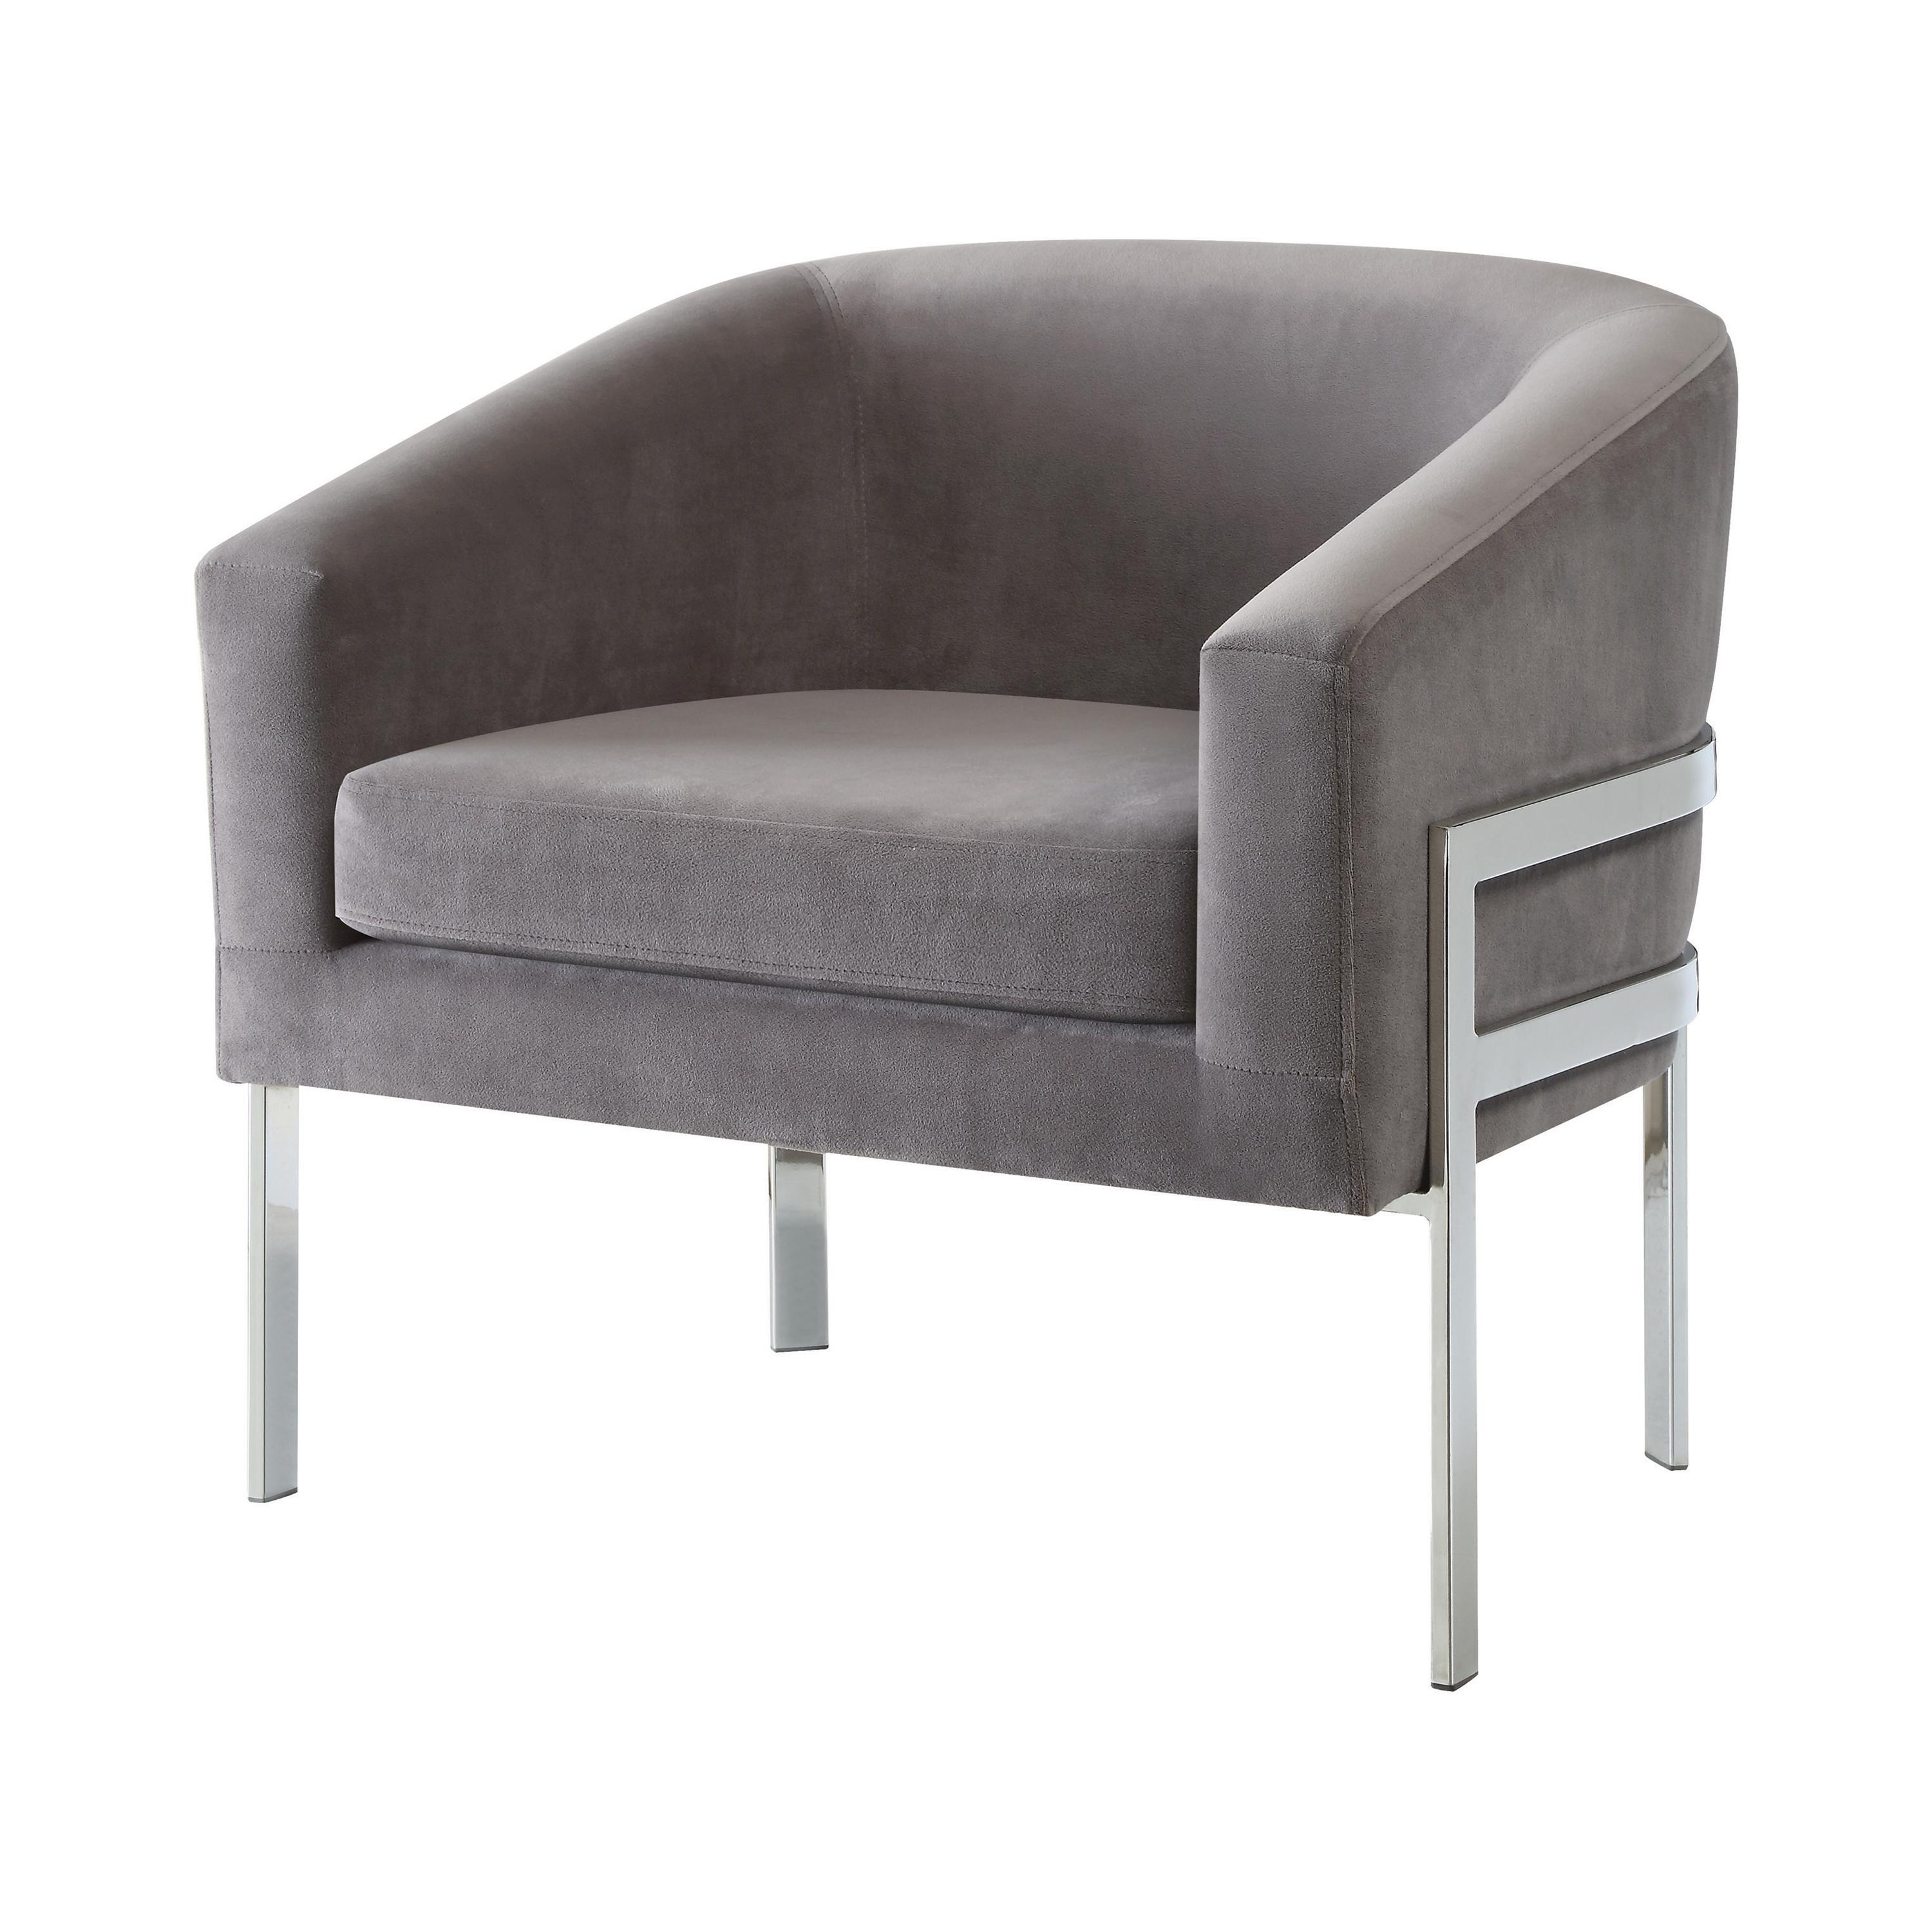 Contemporary Accent Chair 902563 902563 in Gray Velvet